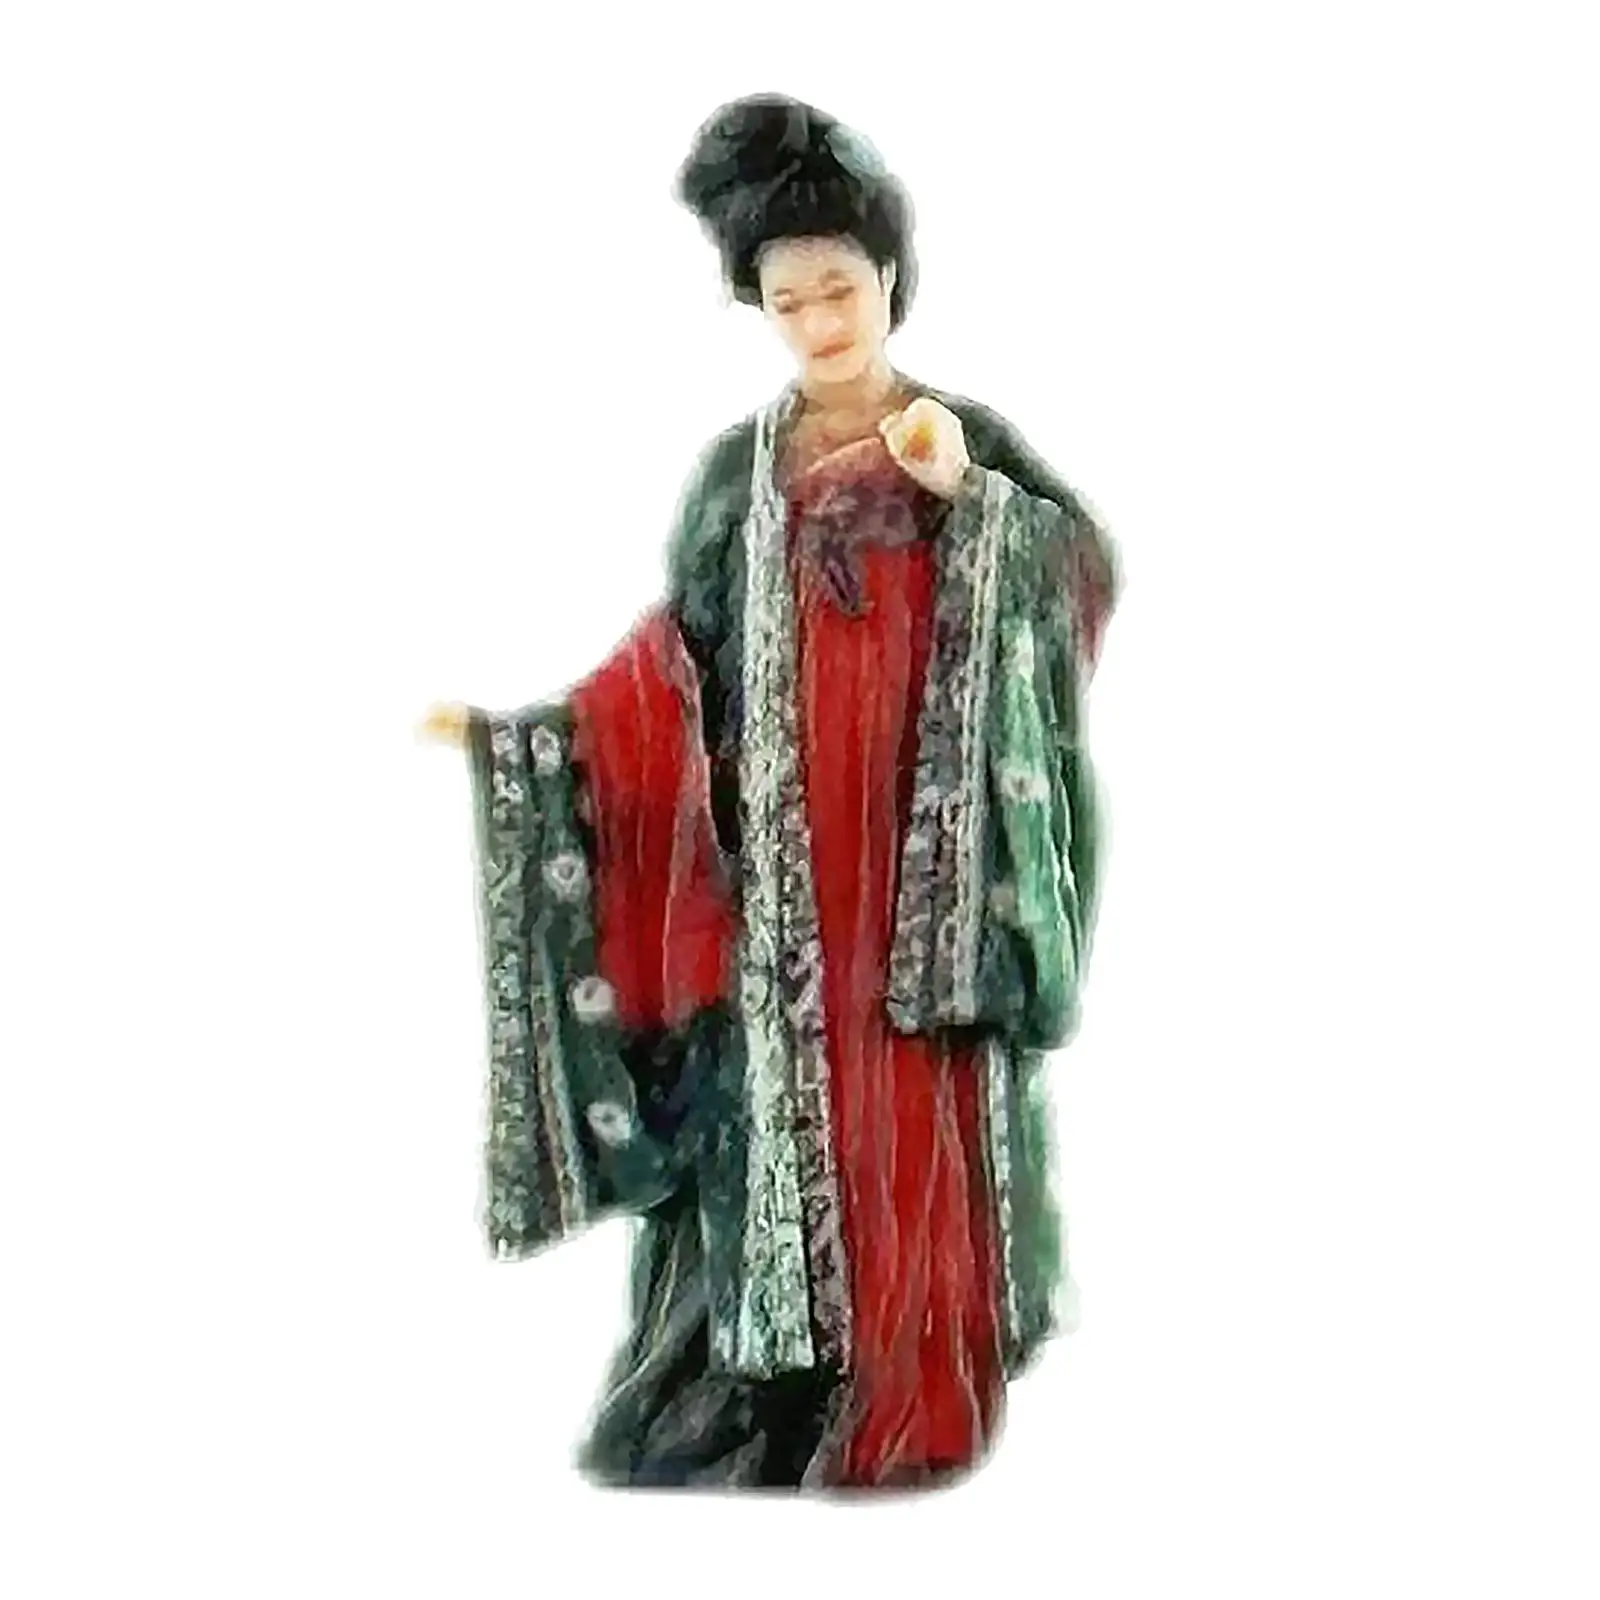 1:64 Miniature Model Figures Handpainted China Ancient Doll Statue Ancient Beautiful Women Statue for Scenery Landscape Layout